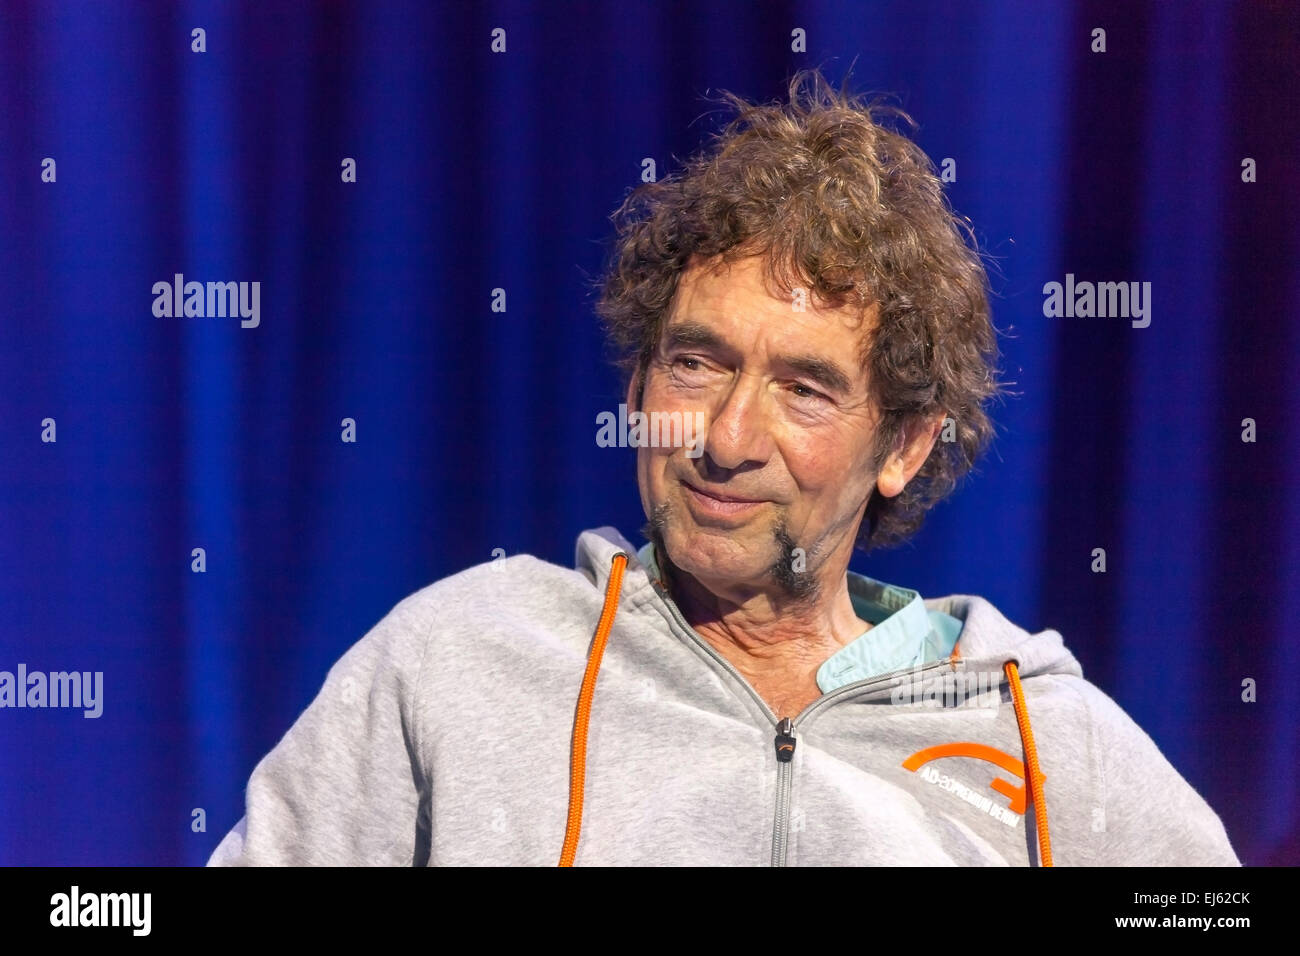 Walsall, West Midlands, UK. 22 March 2015. English singer songwriter Jona Lewie at a recording of ‘The David Hamilton Show’ for Big Centre TV. Hosted by presenter and broadcaster ‘Diddy’ David Hamilton the show features famous personalities from across the music and television spectrum. Credit:  John Henshall / Alamy Live News PER0526 Stock Photo